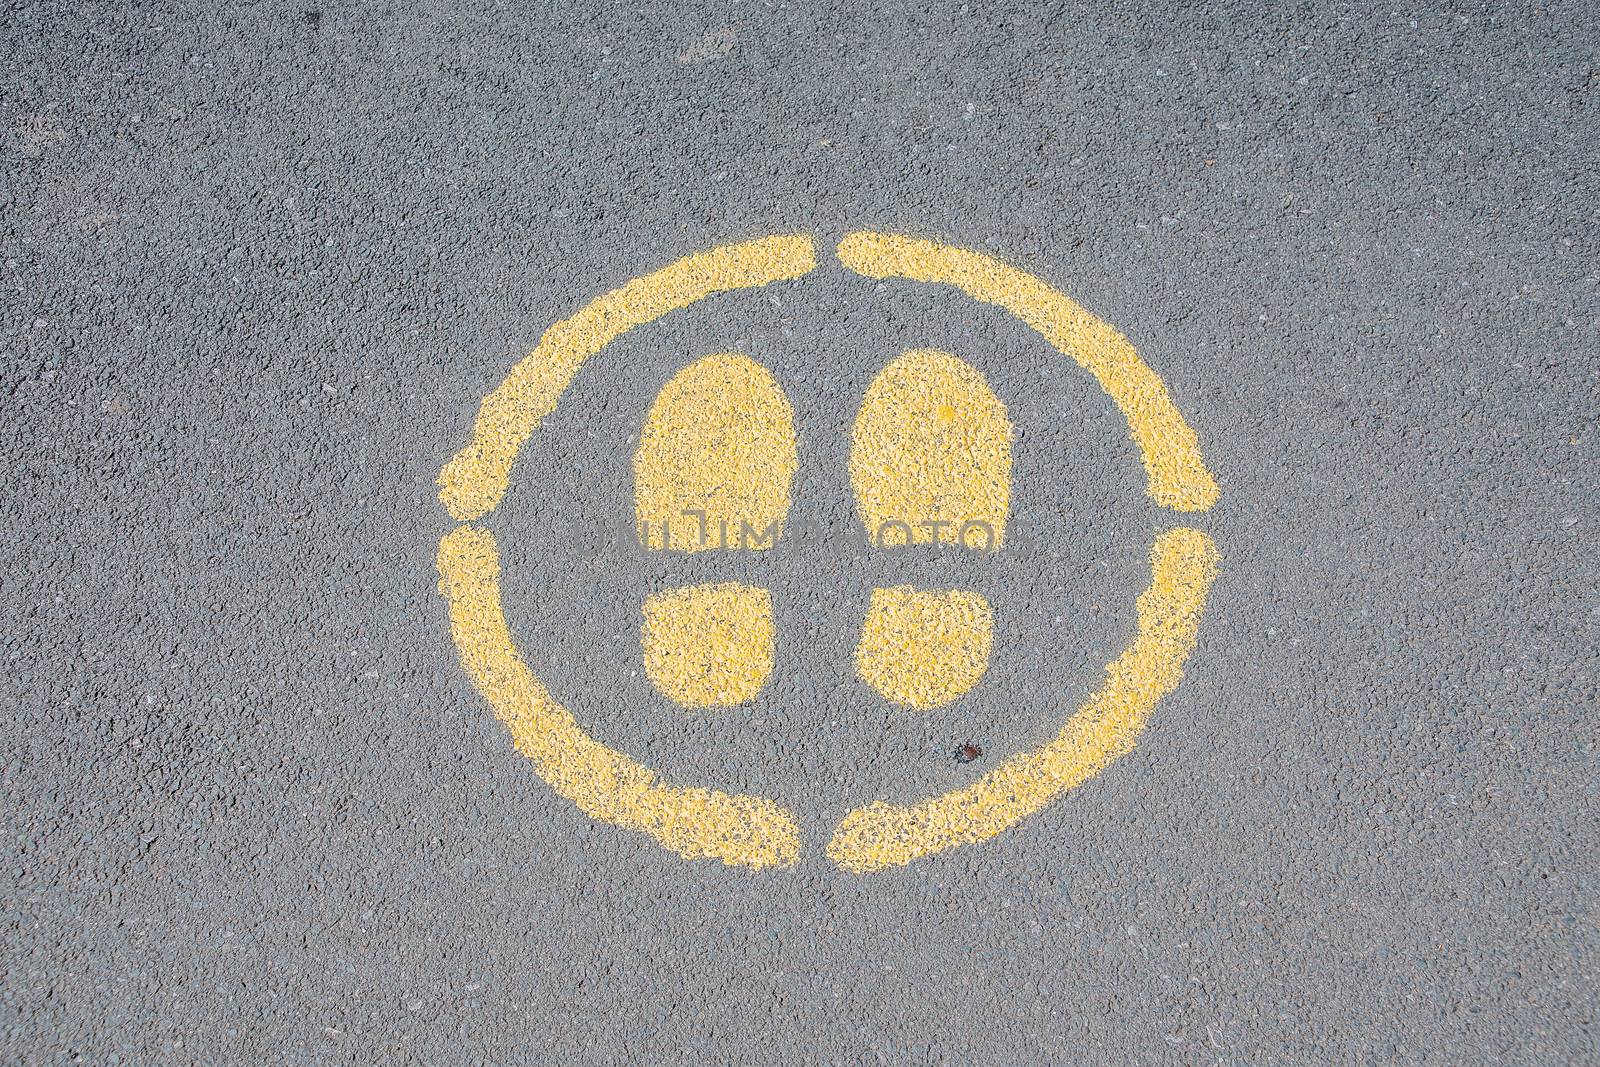 Sign painted on a pavement indicating where to stand